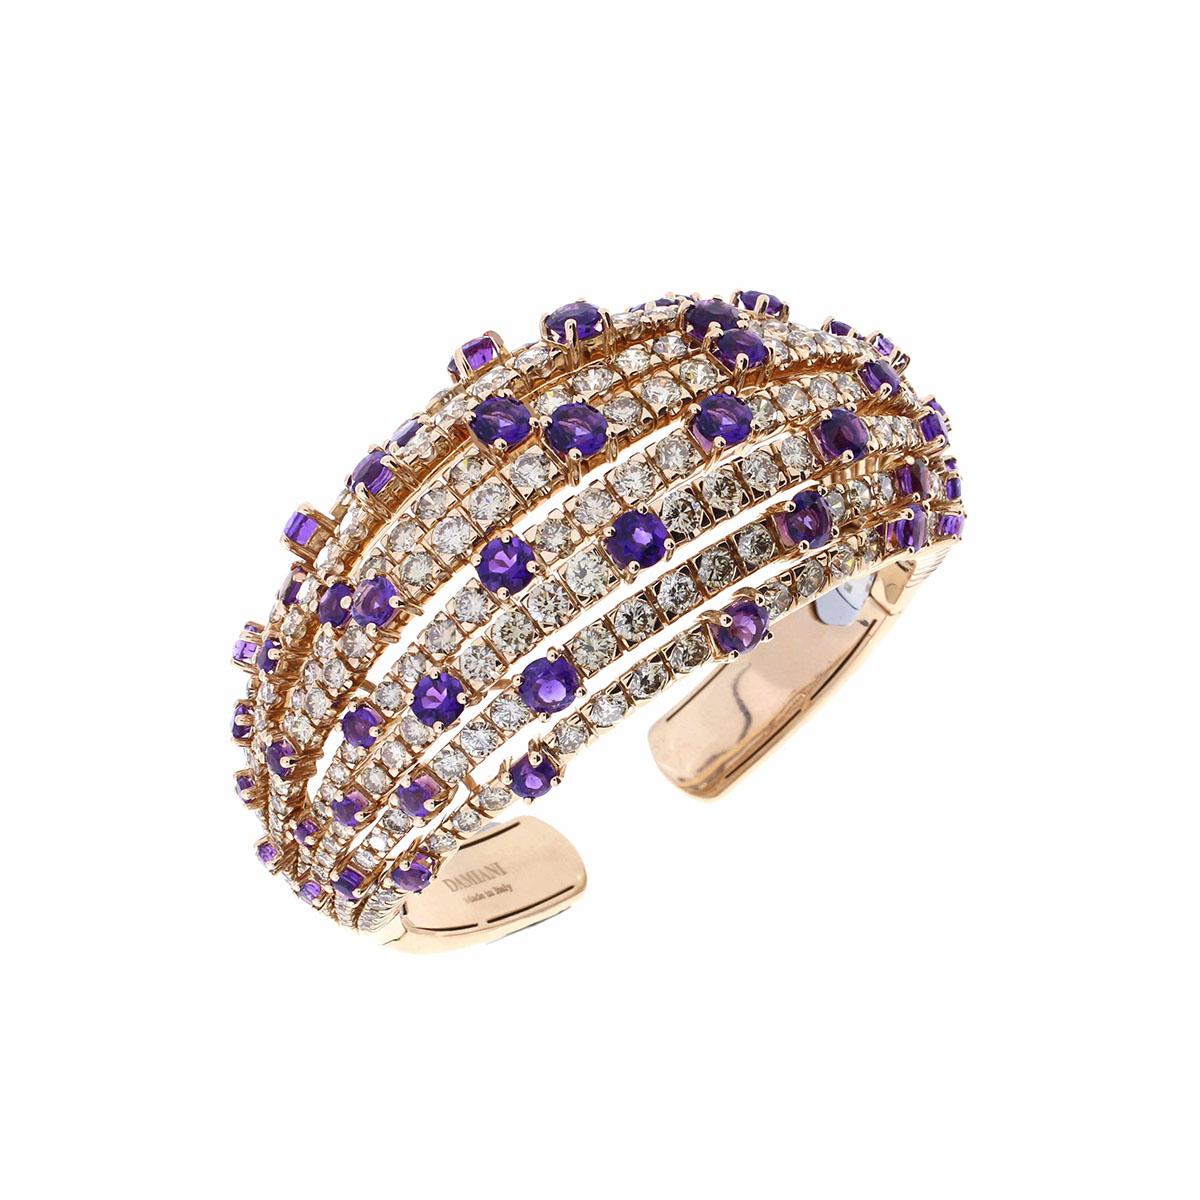 Diamonds and Amethyst mounted on rose Gold 18K.
Diamonds: 22.16 carats. Amethyst: 13.50 carats.
Total weight: 128.40 grams.